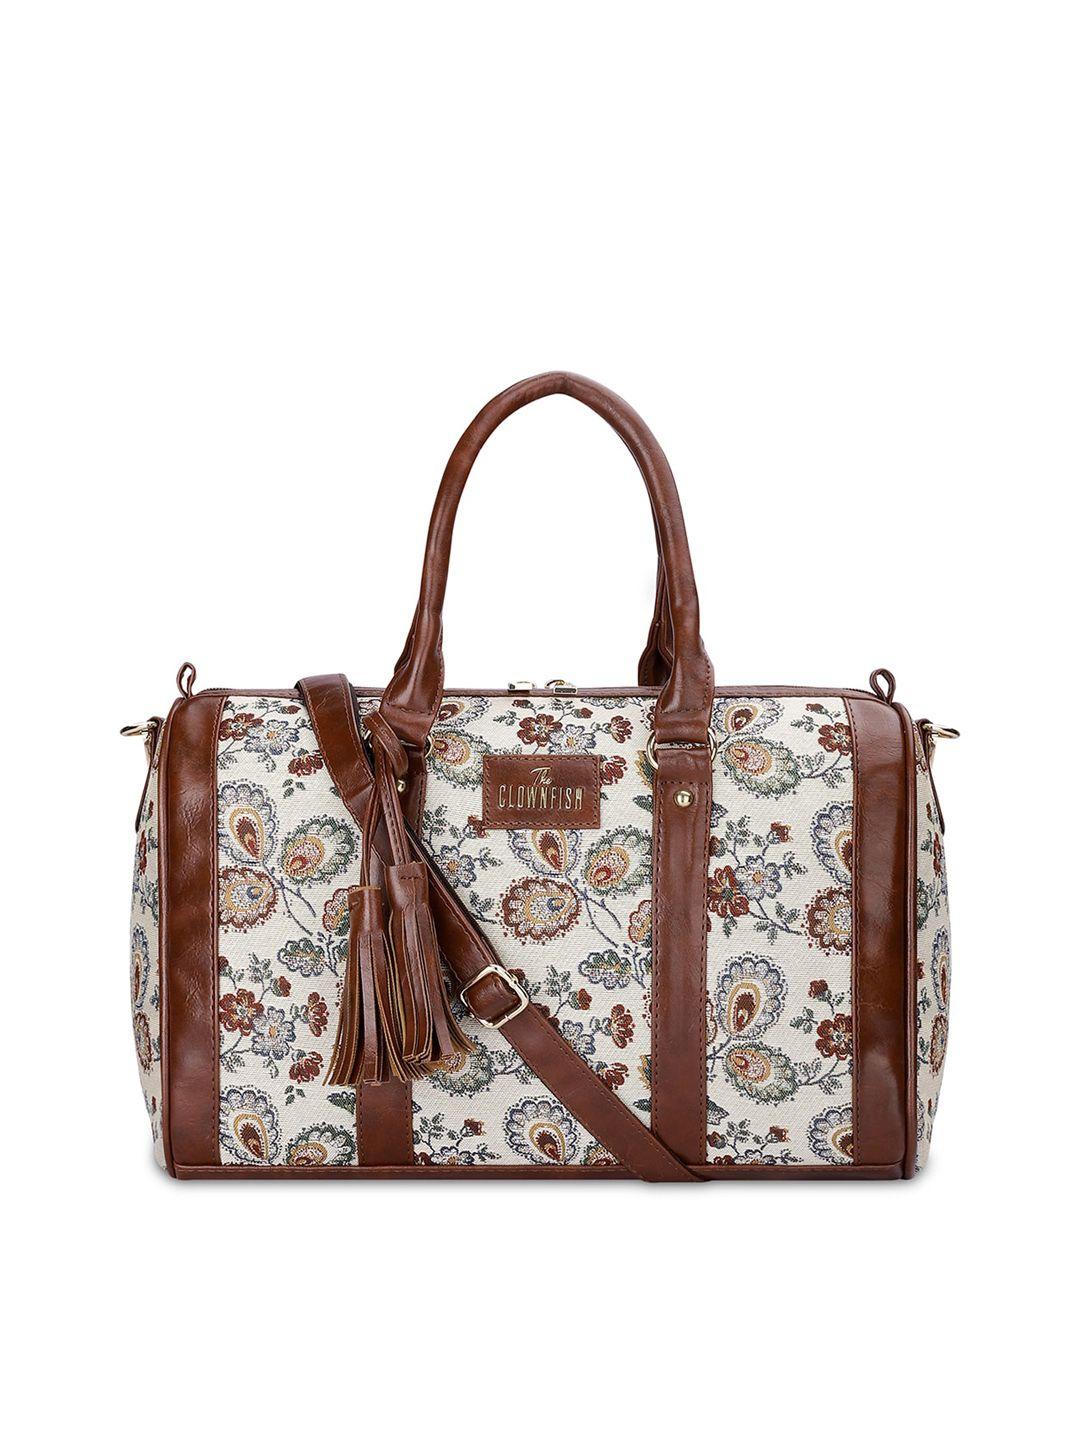 the clownfish floral printed structured handheld bag with tasselled